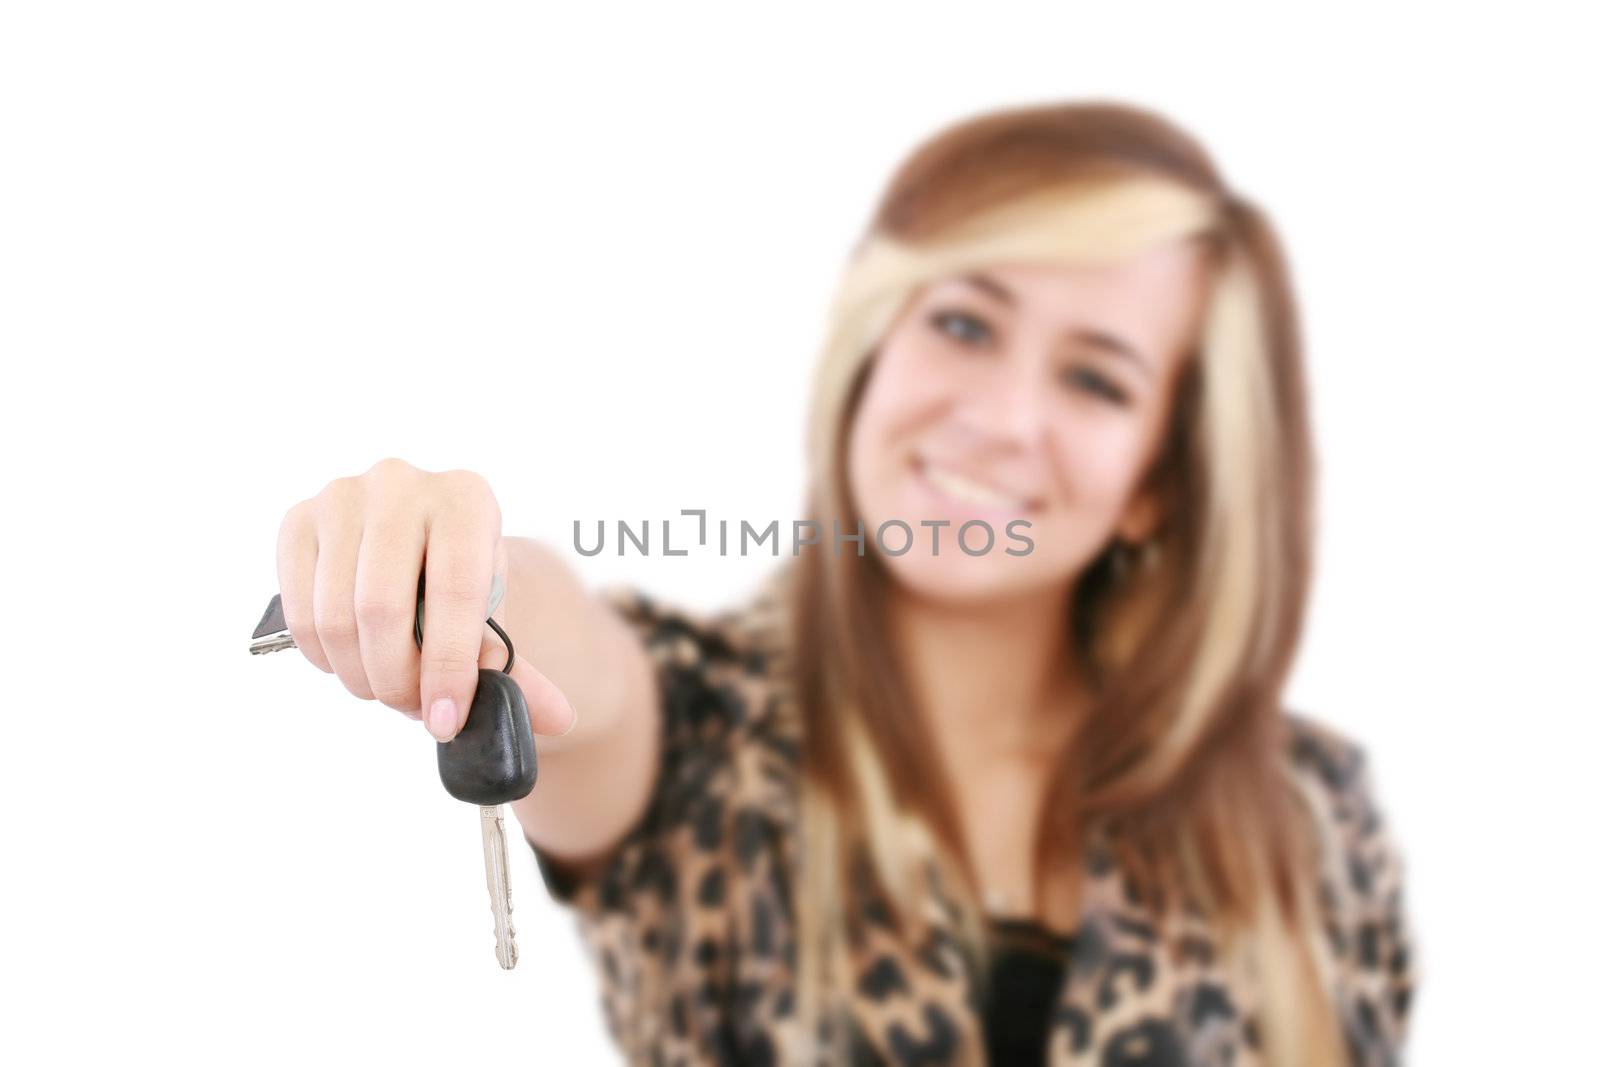 Young caucasian woman holding car key. Image with shallow depth of field. The key is in focus.